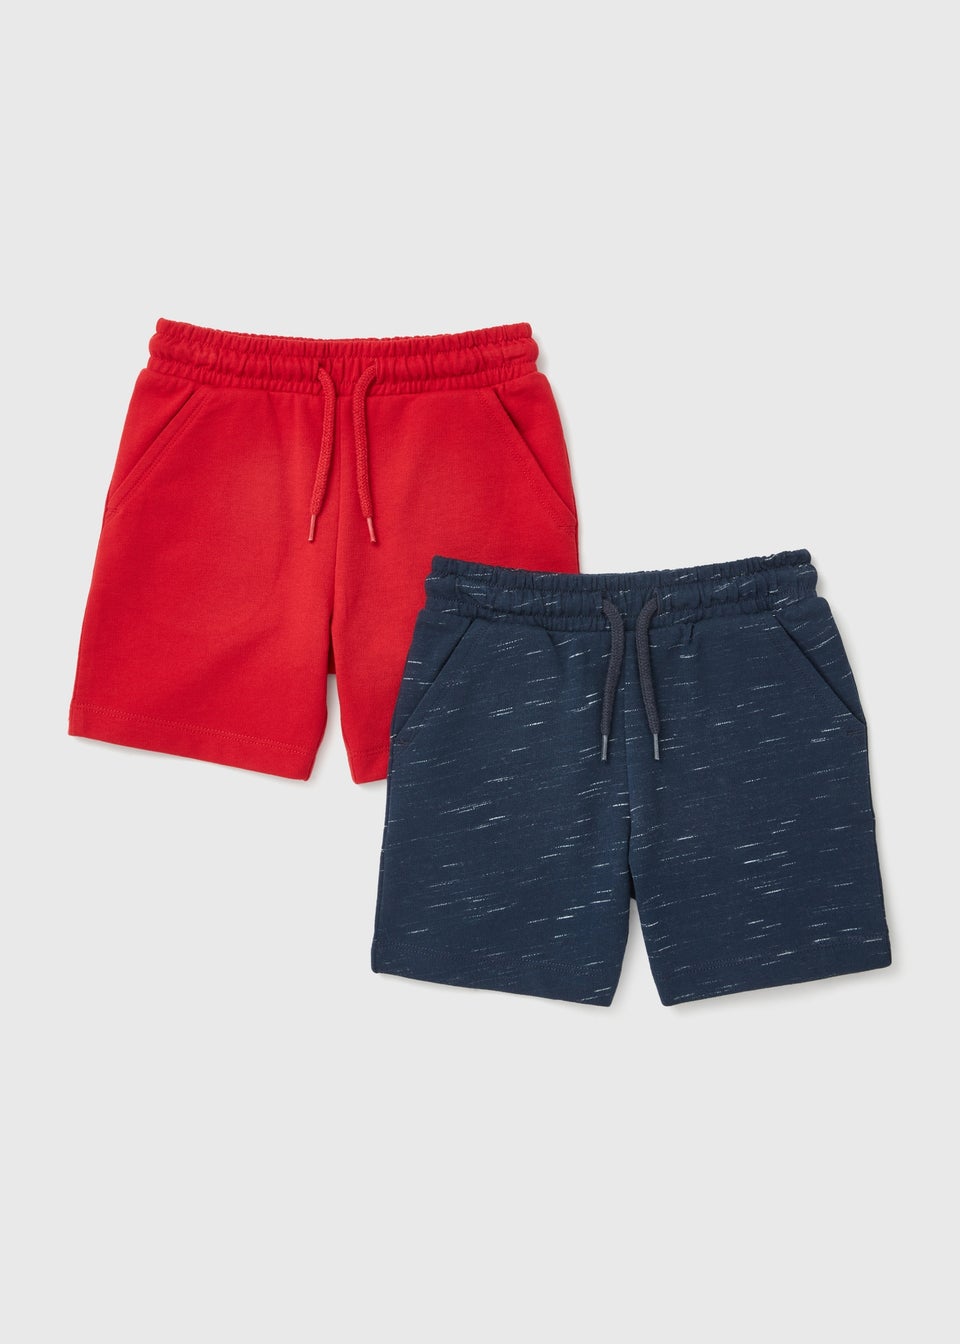 Boys 2 Pack Red & Navy Shorts